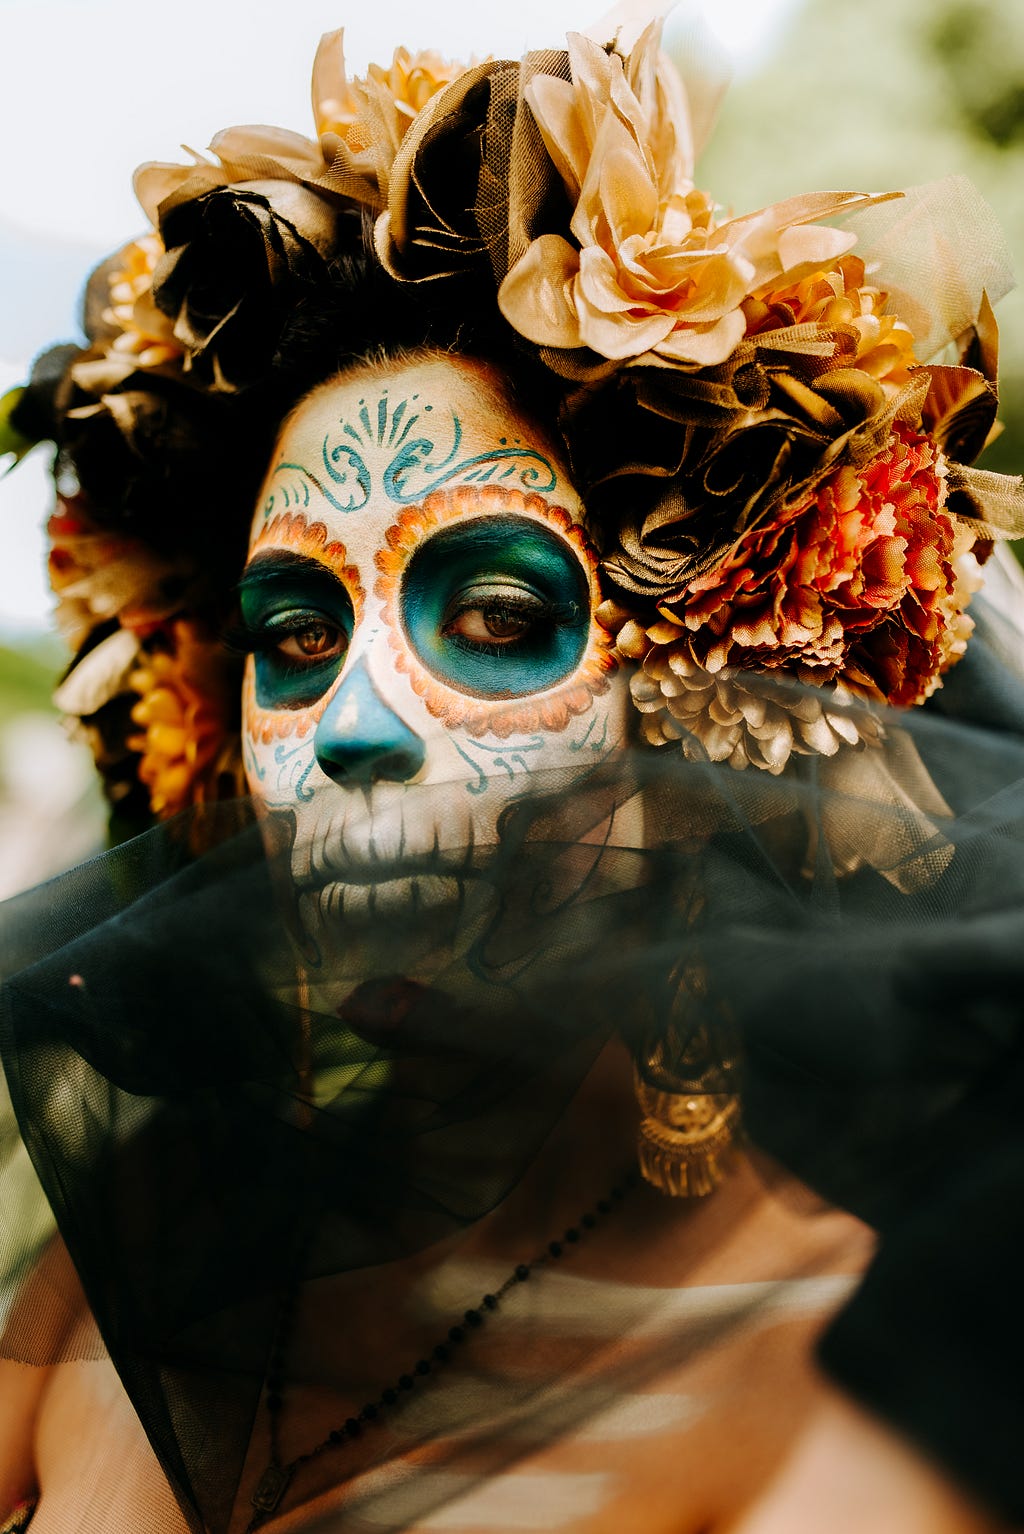 A women wearing a skull-ish make up, celebrating Dia De Los Muertos, the festival of the dead in Mexico